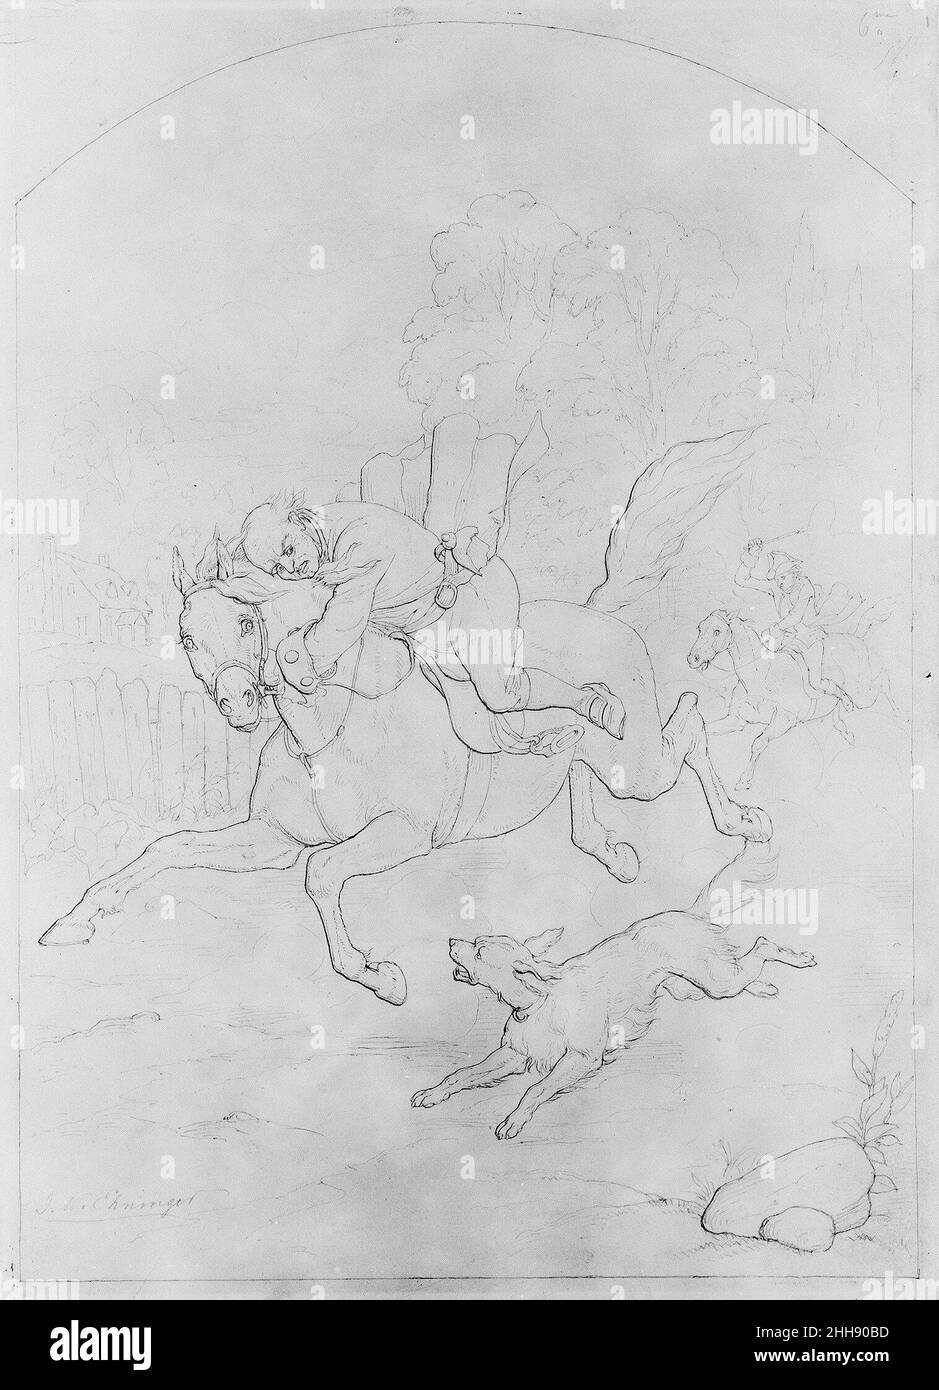 Illustration to William Cowper's Poem 'The Diverting History of John Gilpin': John Gilpin on His Horse Stampeding Back to London 1857 John Whetten Ehninger American. Illustration to William Cowper's Poem 'The Diverting History of John Gilpin': John Gilpin on His Horse Stampeding Back to London  14925 Stock Photo